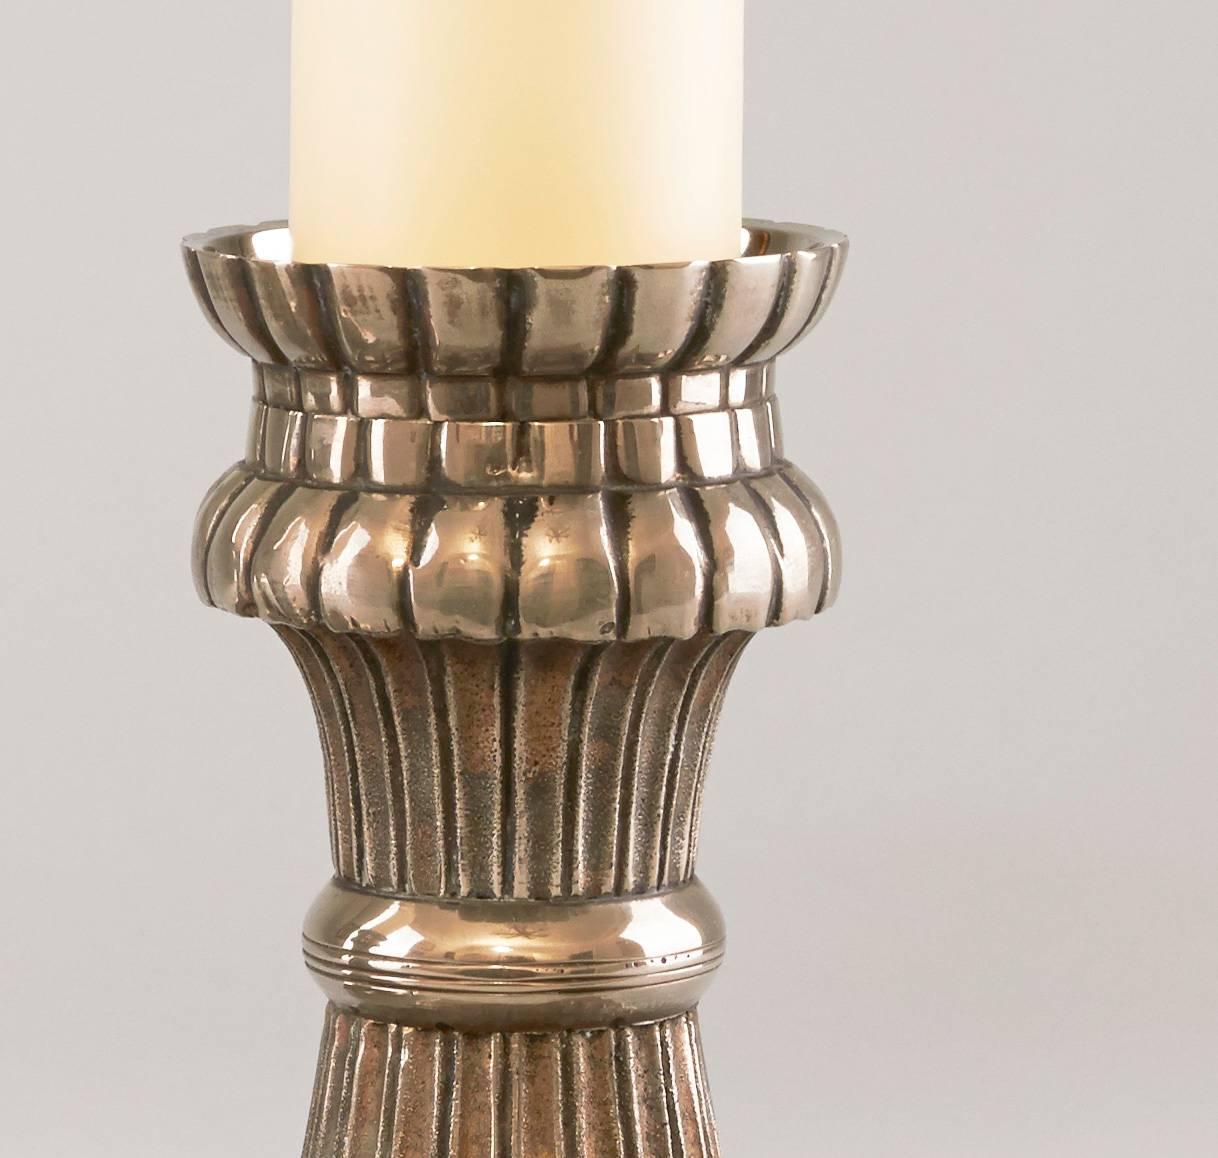 Pair of French nickel-plated metal candlesticks.